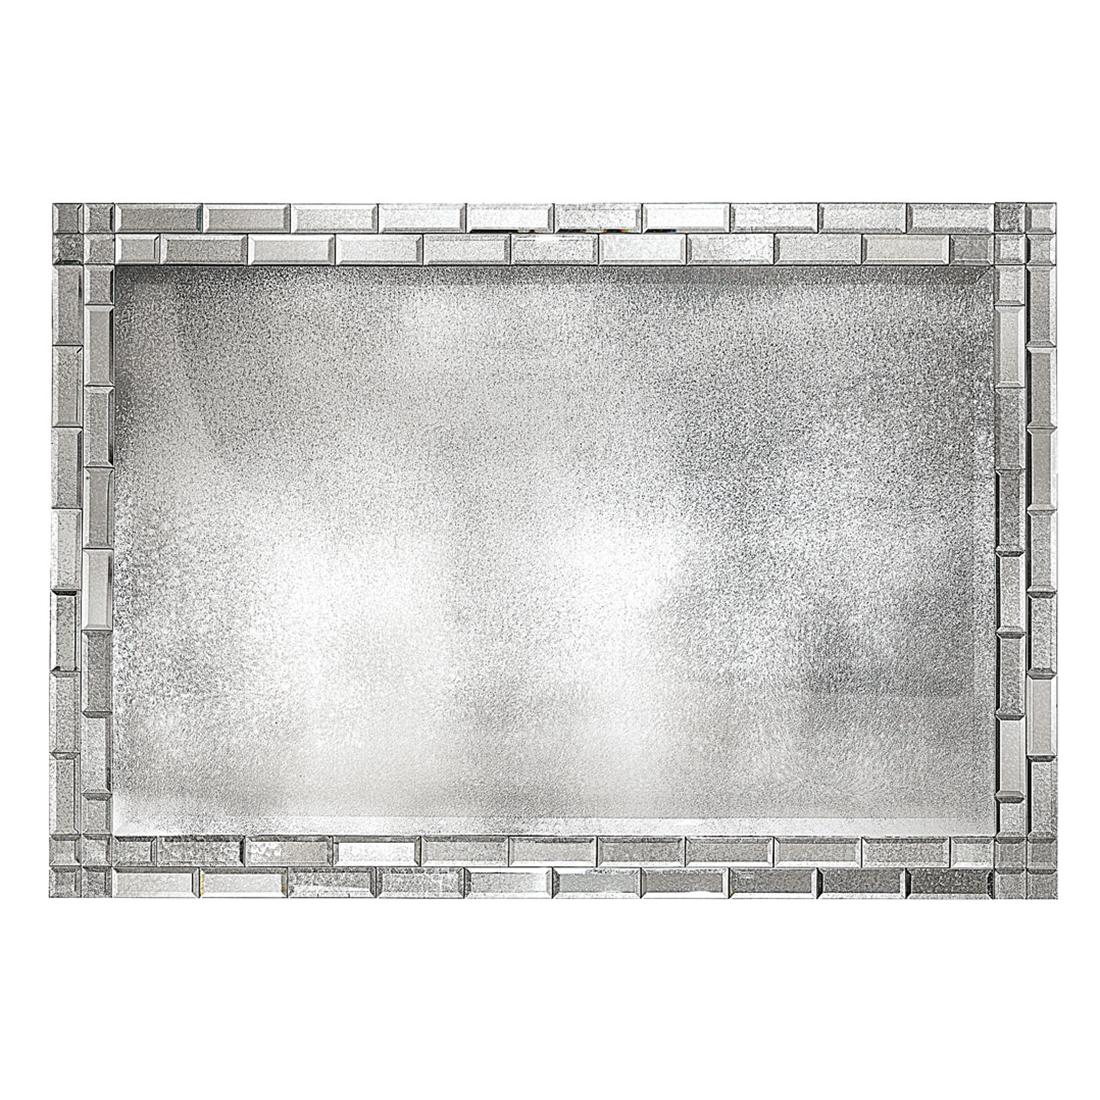 Mirror Arty Deco with wooden structure covered
with antique mirrored glass in matte finish. Bevelled 
glass with medium antique mirrored finish on central part
and frame made of bevelled glass tiles with medium antique 
mirrored finish. 